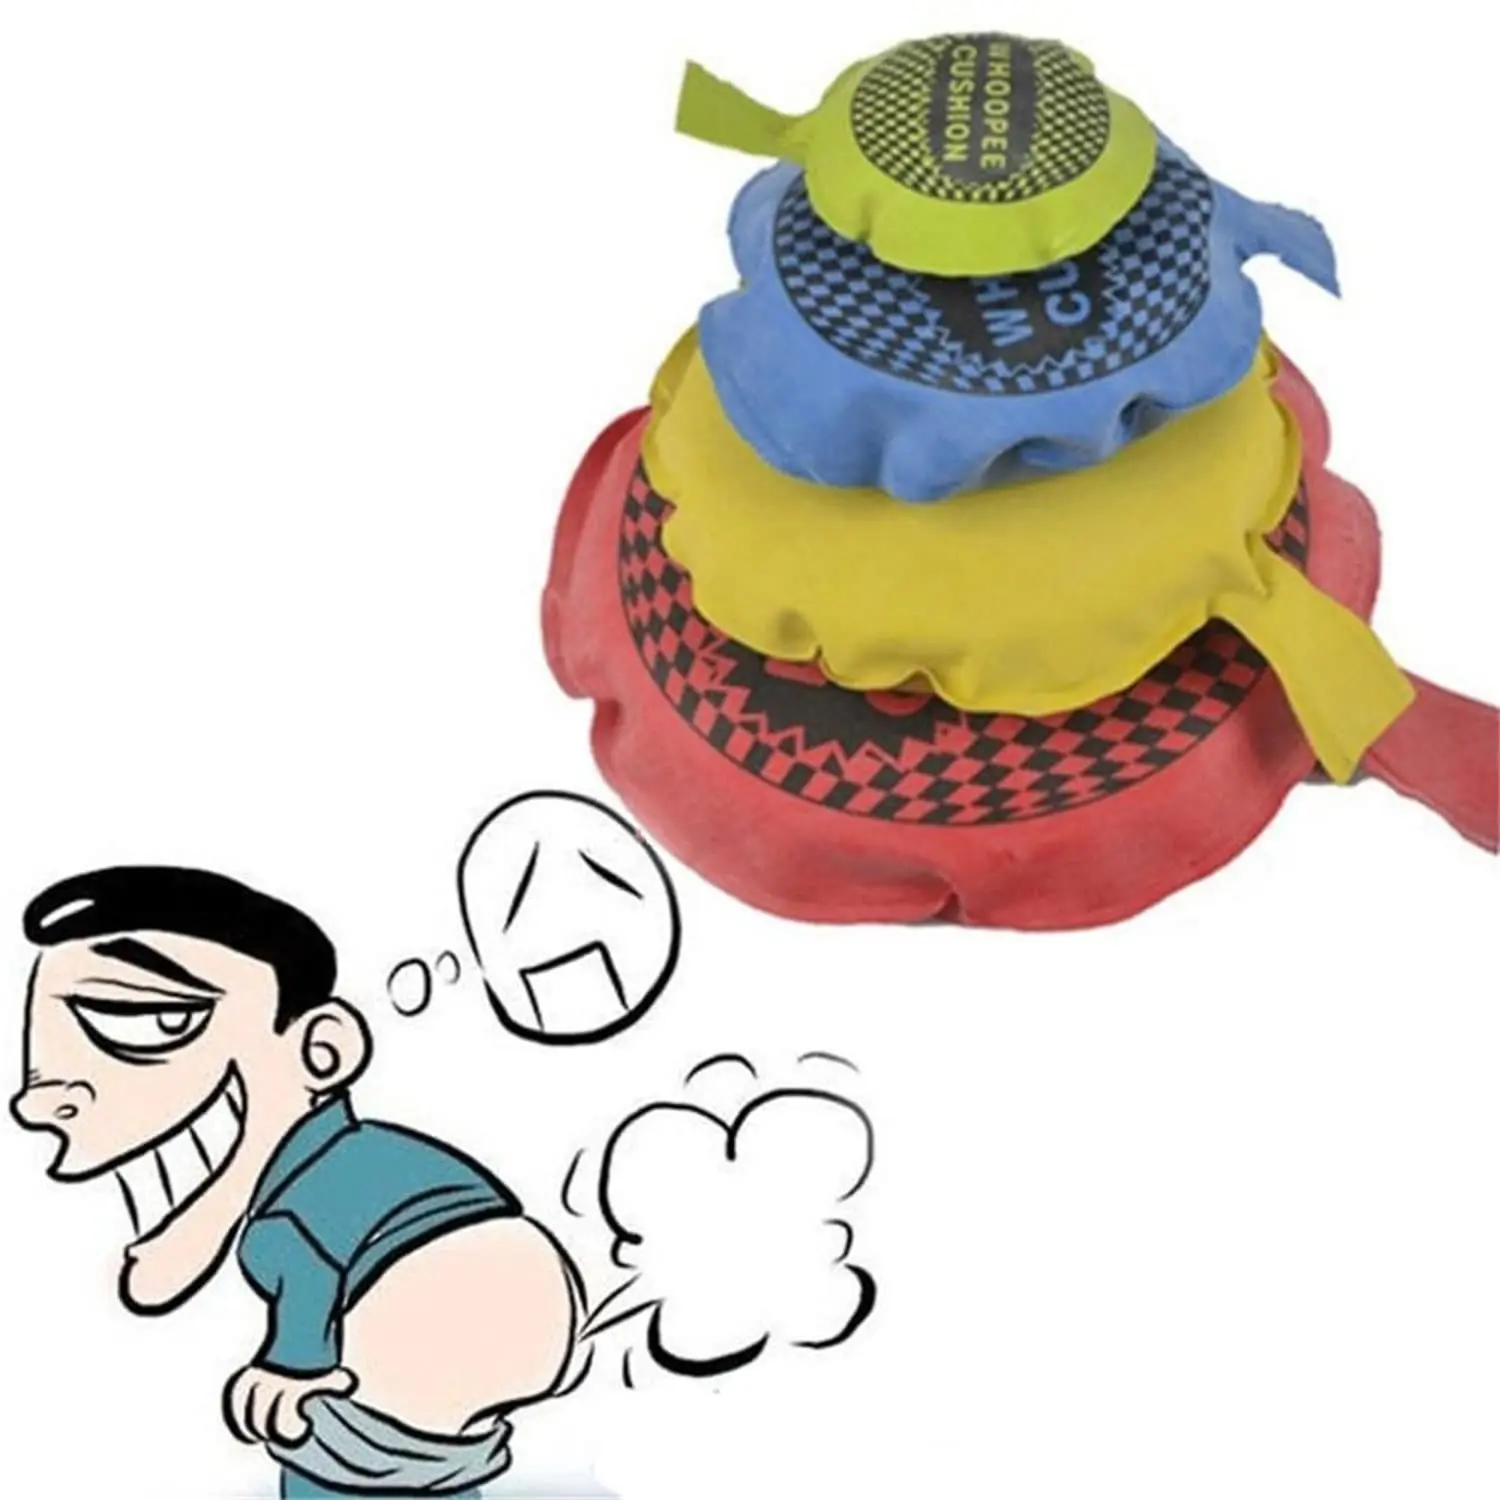 Whoopee Cushion Jokes Gags Kids Fun Baby Prank Toys Fart Pad Pillow Child Adult Toy Halloween Whoopie Makes Gas Sounds Item